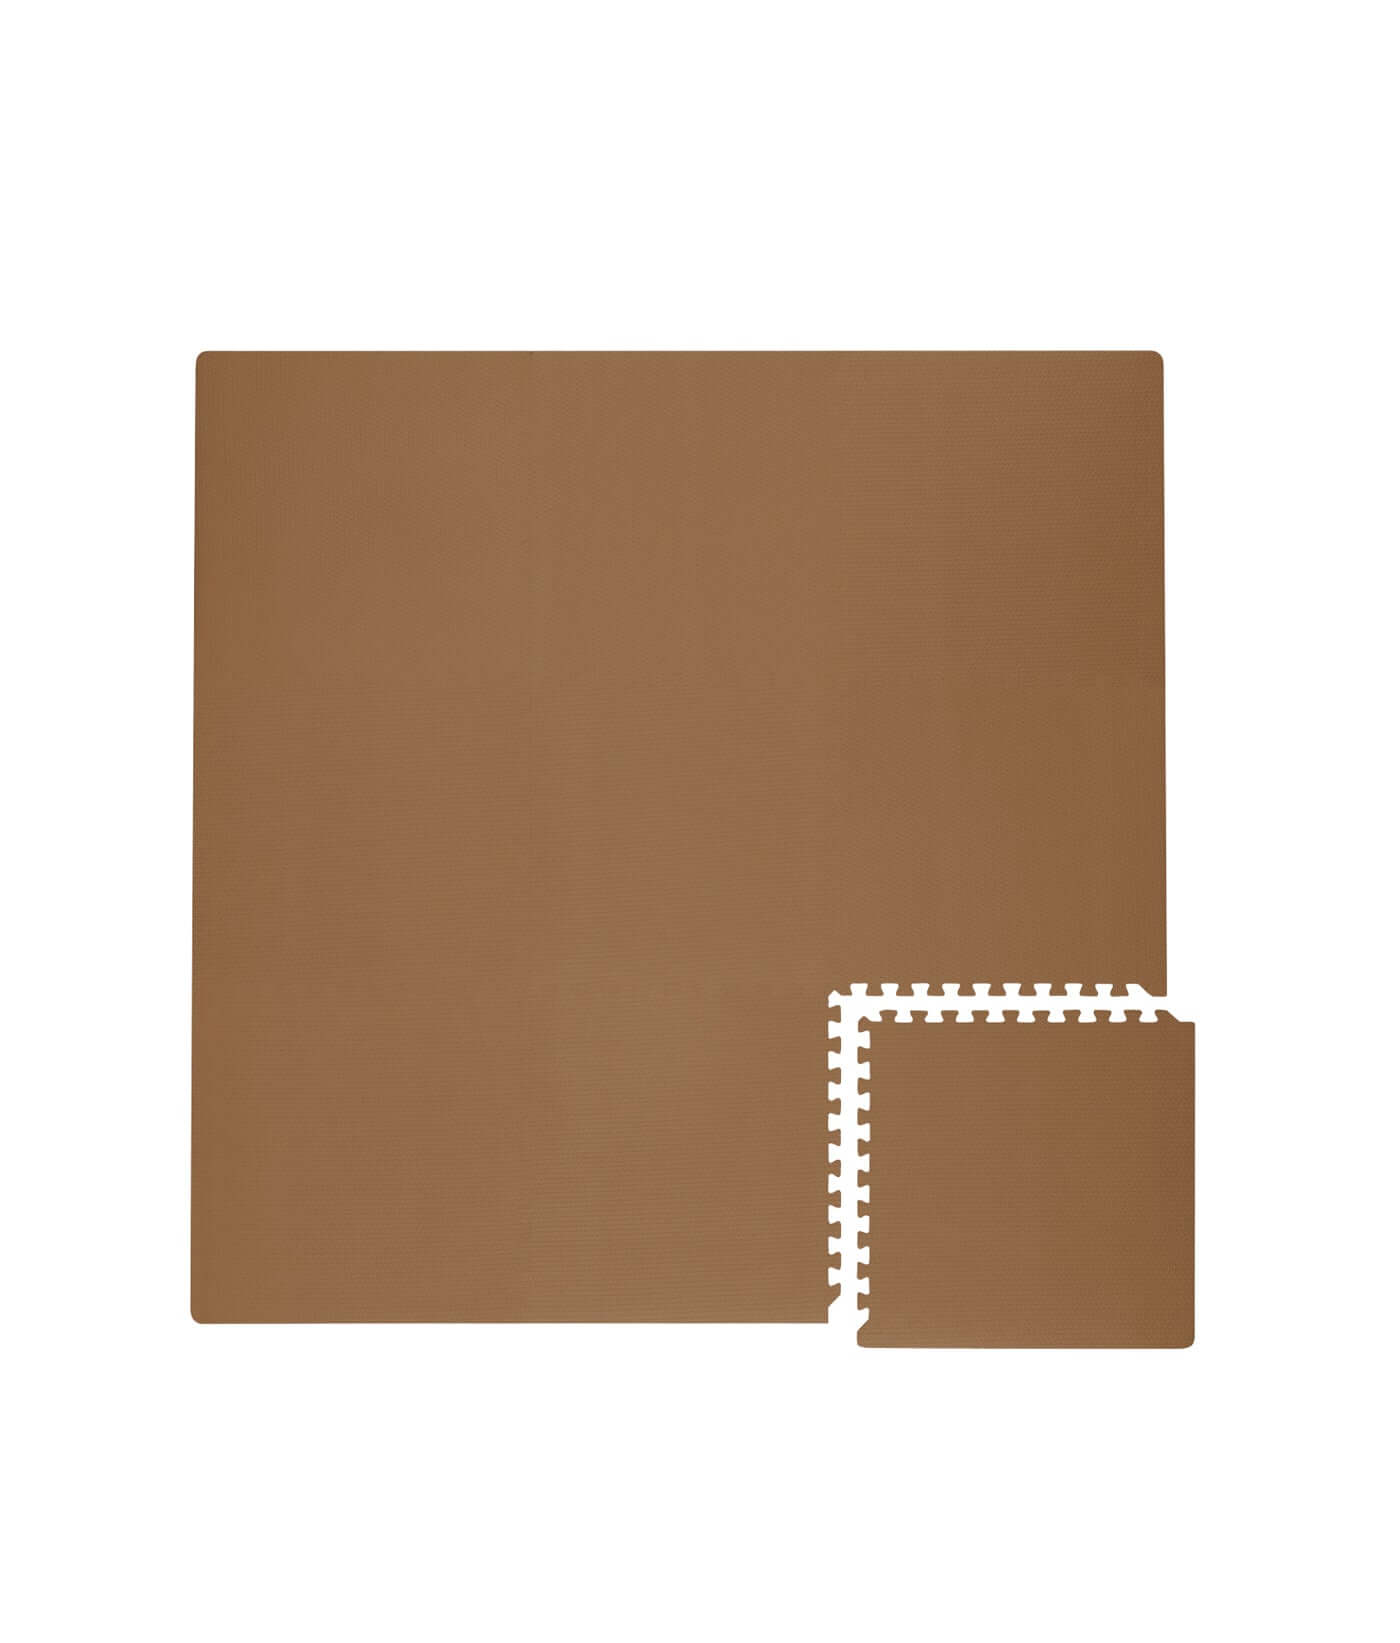 Classic Puzzle Playmats | Camel Premium EVA foam puzzle playmat with edge pieces Non-toxic and exceeds safety testing CLASSIC PUZZLE PLAYMAT. Practical puzzle playmats made from premium quality foam in a pallet of neutral, décor friendly colors. The edgin